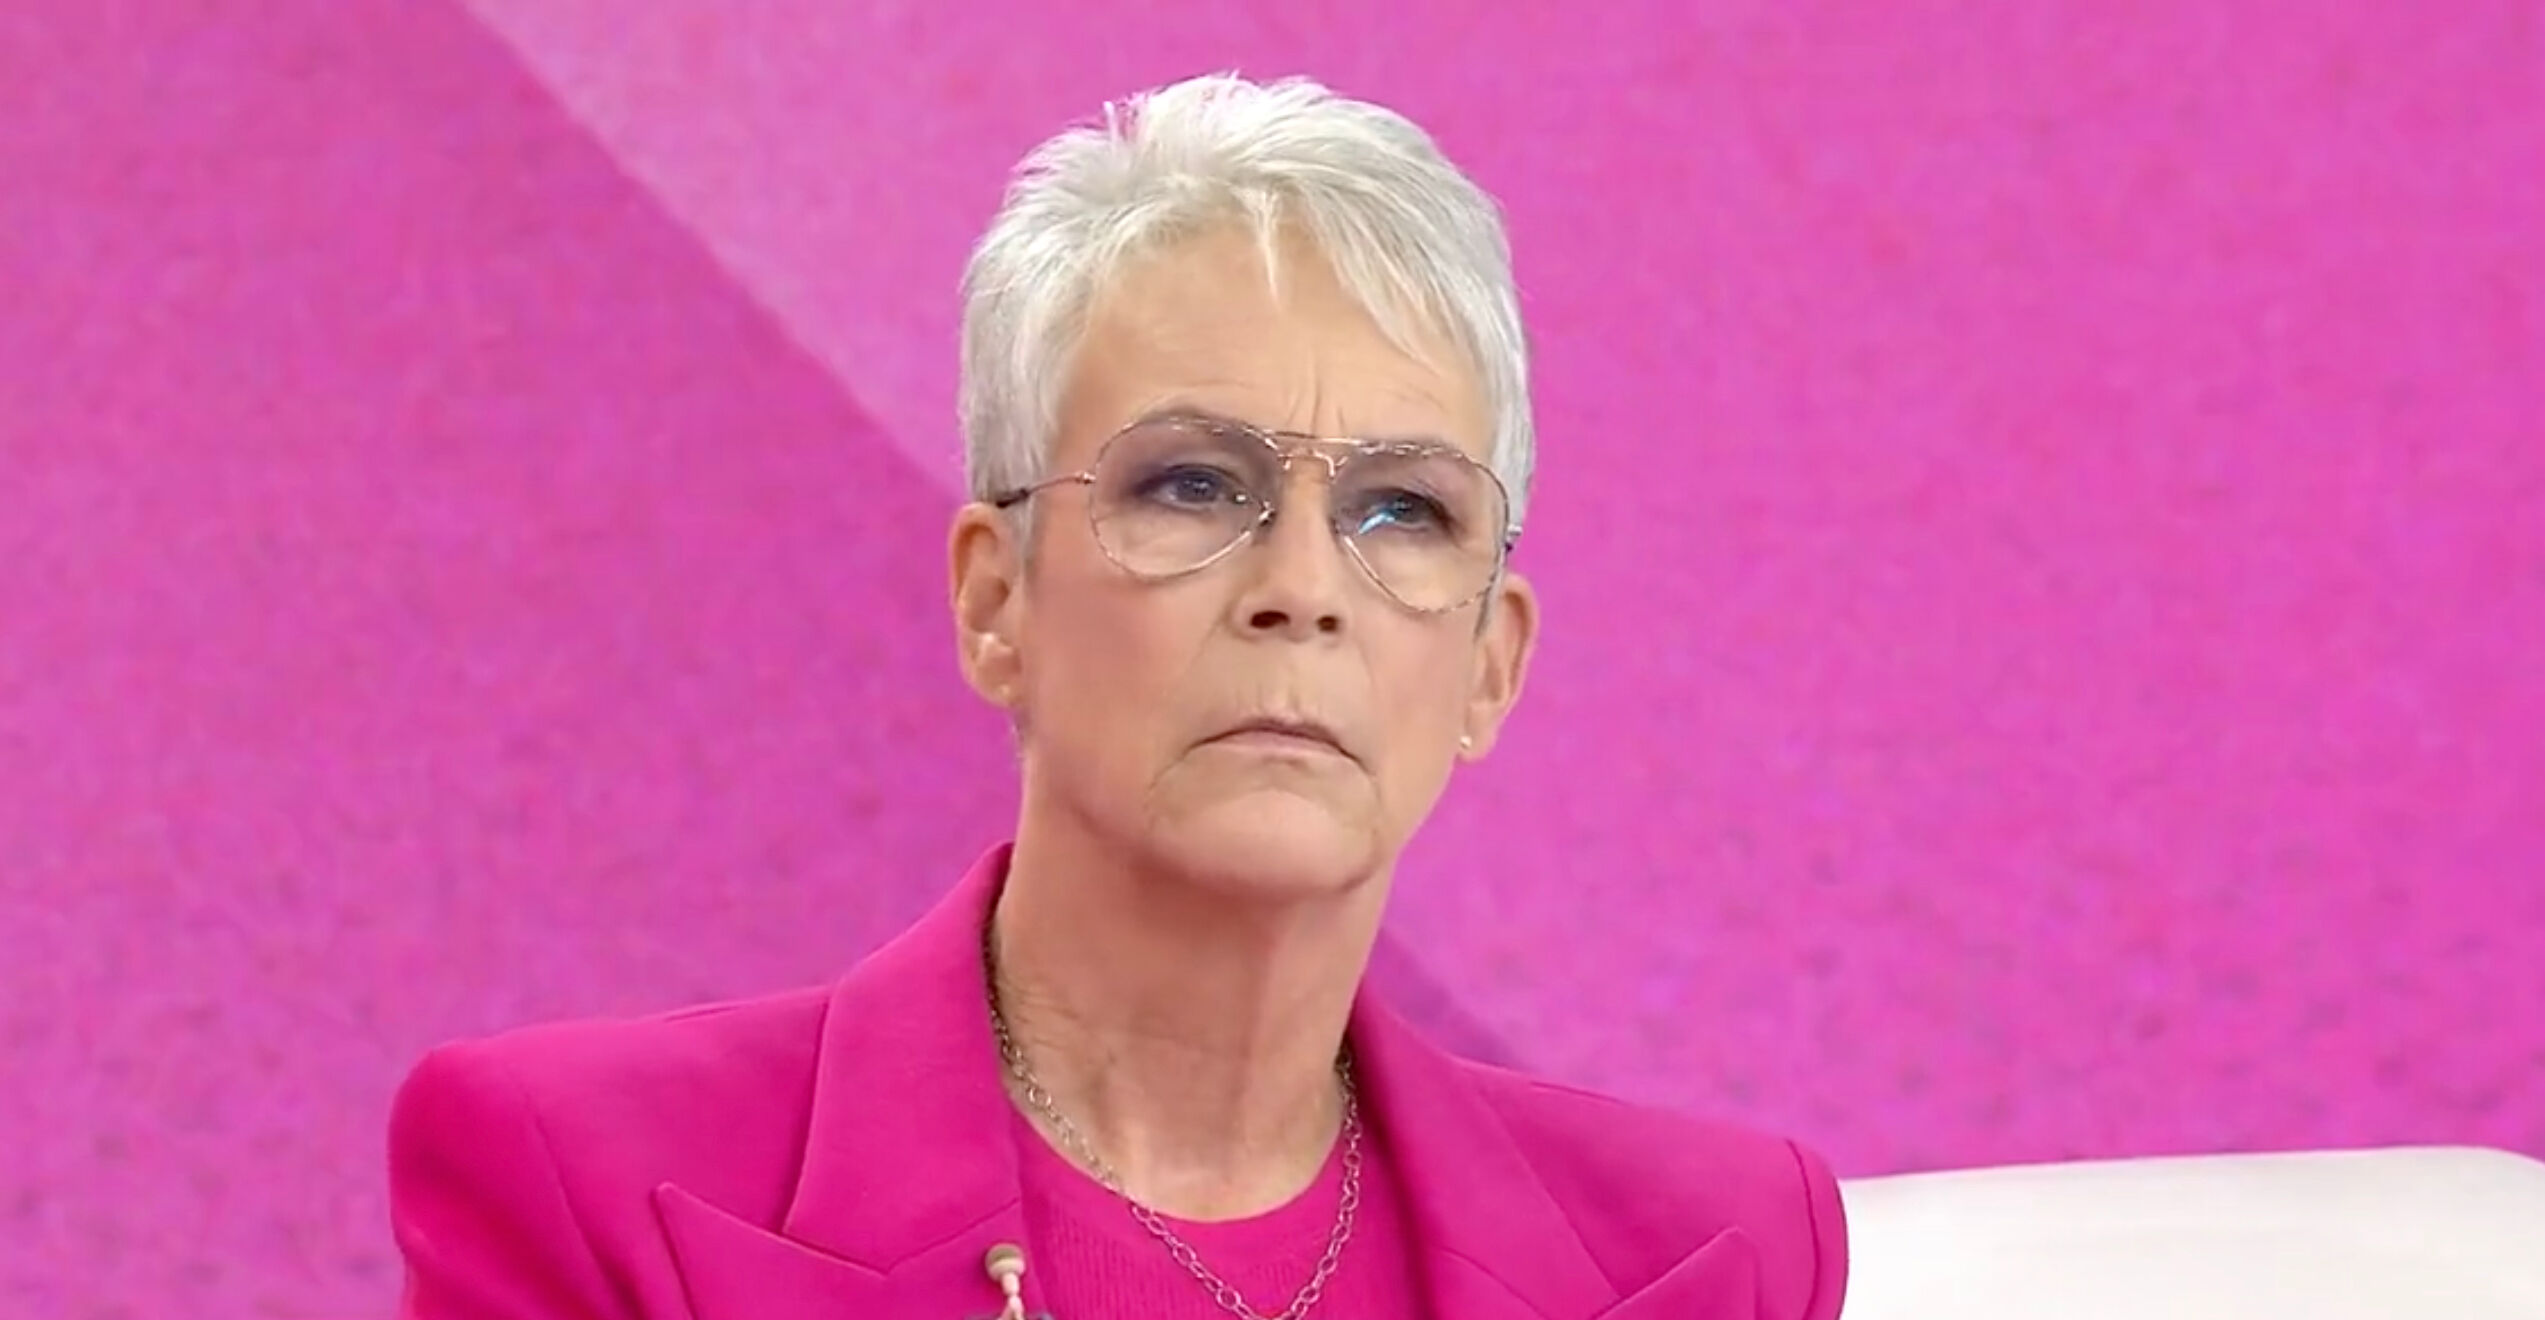 Jamie Lee Curtis on "The Today Show"